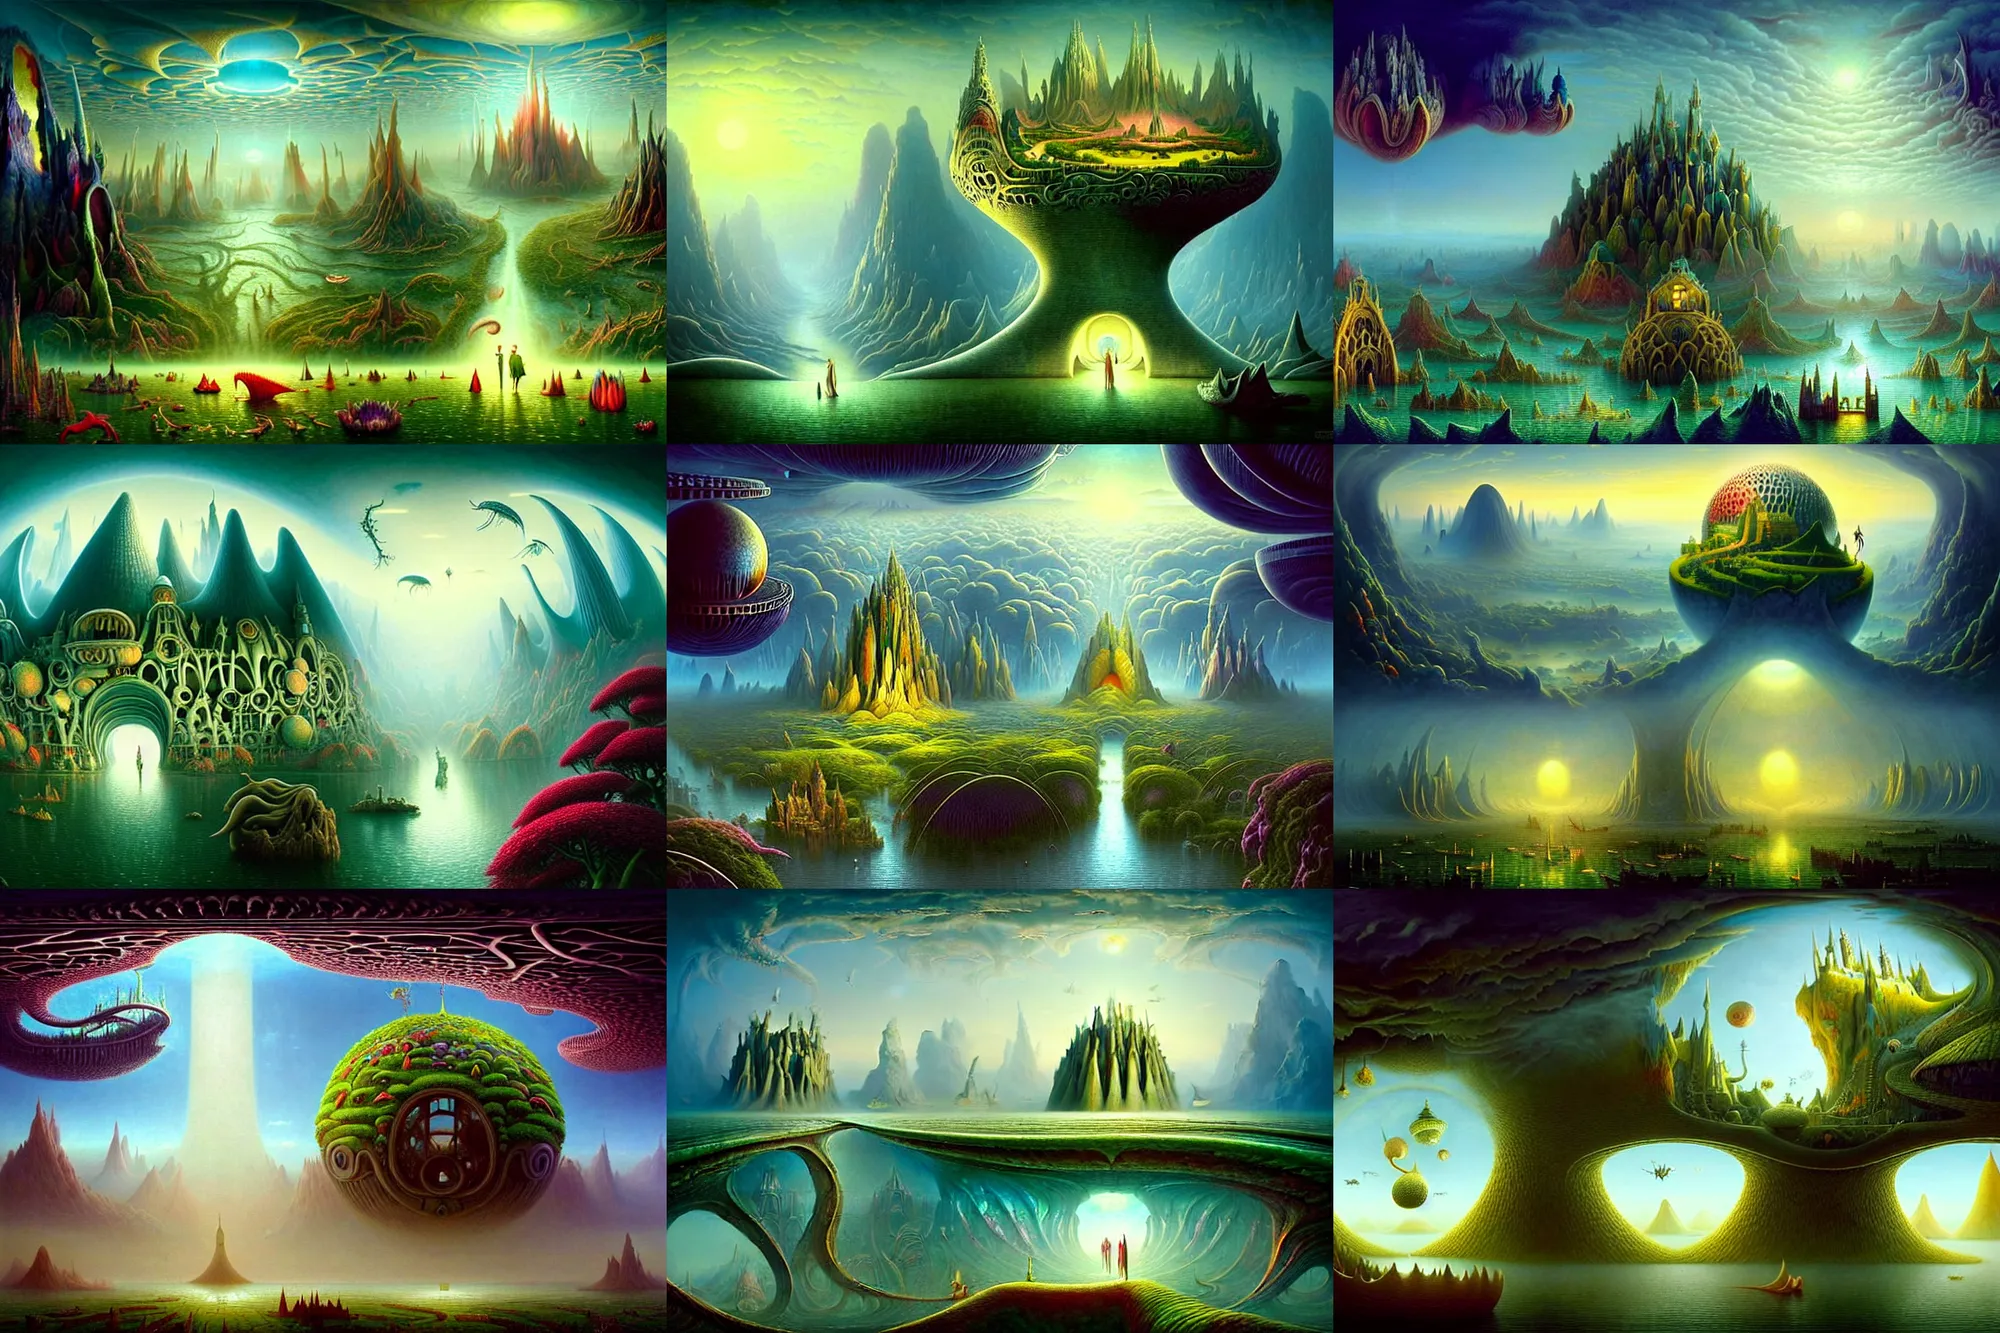 Prompt: a beautiful epic stunning amazing and insanely detailed matte painting of alien dream worlds with surreal architecture designed by Heironymous Bosch, mega structures inspired by Heironymous Bosch's Garden of Earthly Delights, vast surreal landscape and horizon by Cyril Rolando and Thomas Kinkade, masterpiece!!, grand!, imaginative!!!, whimsical!!, epic scale, intricate details, sense of awe, elite, wonder, insanely complex, masterful composition, sharp focus, dramatic lighting